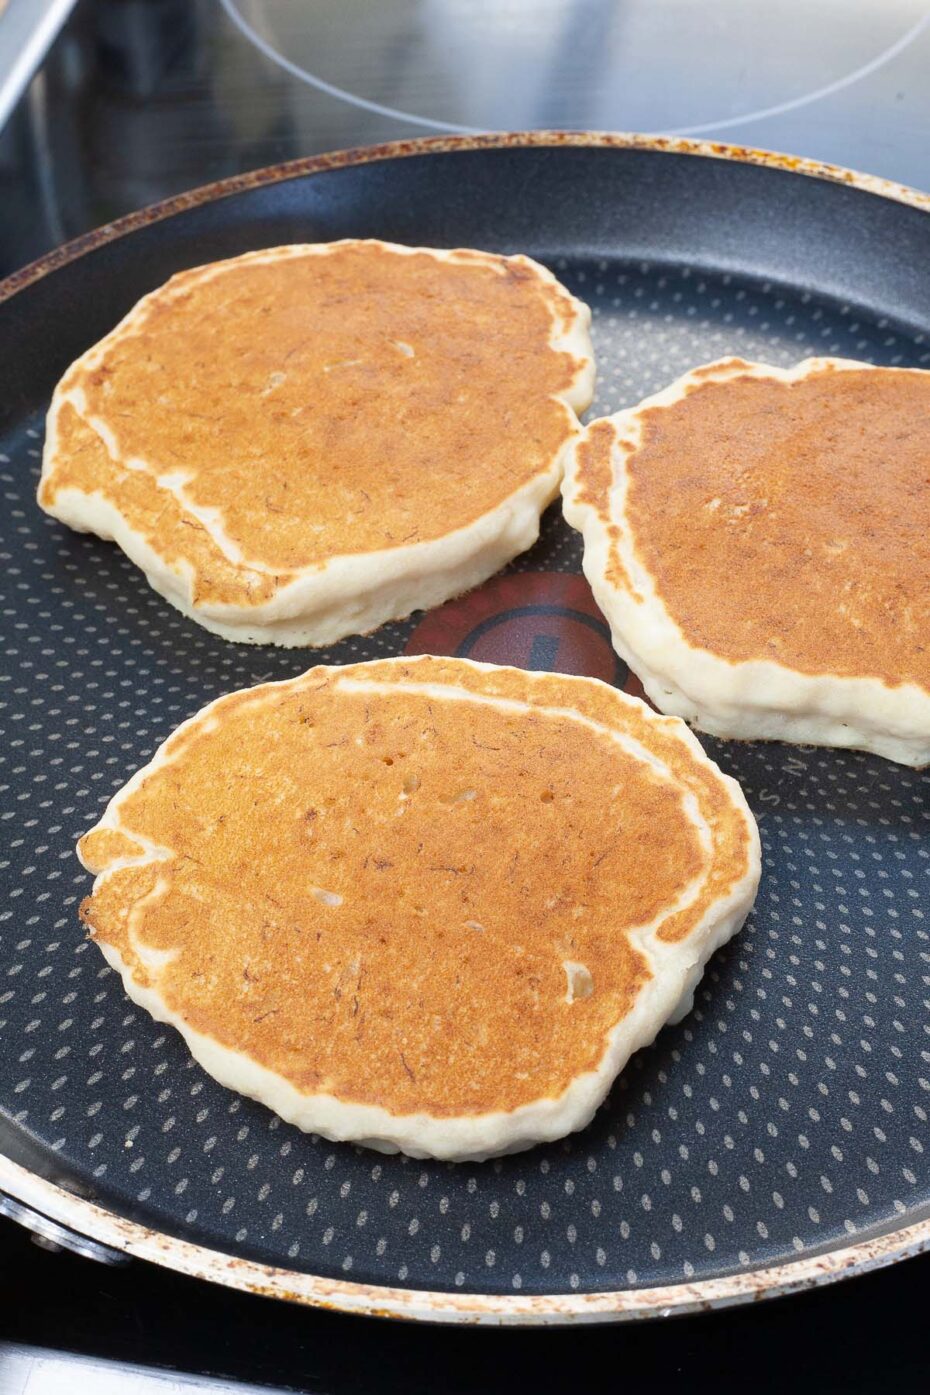 Black frying pan with 3 pancakes after they are flipped so the tops are golden brown